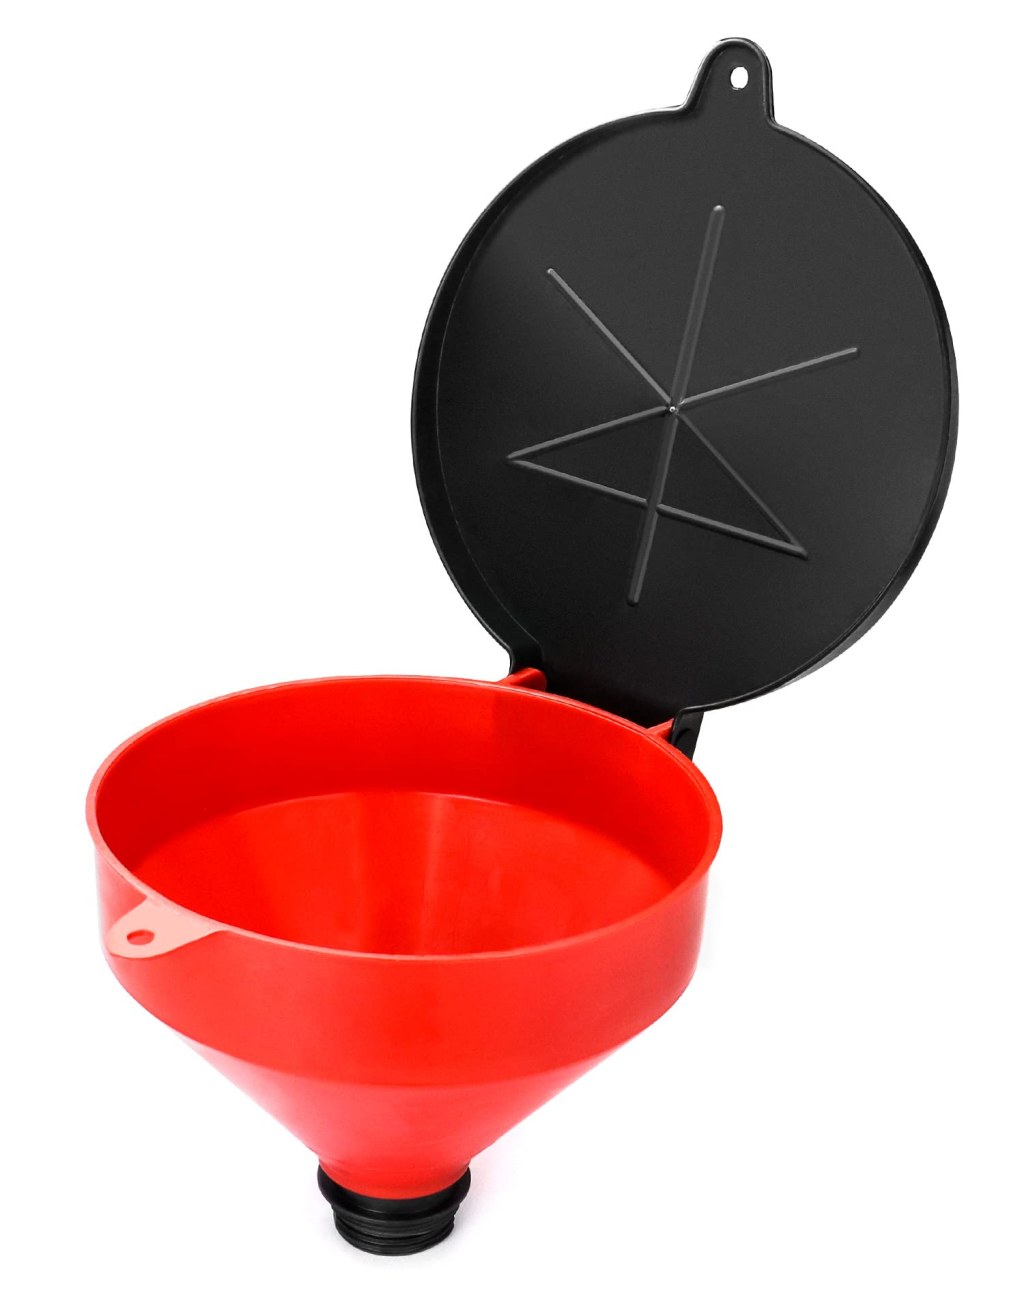 drum funnel with screen - QWORK  Quart Lockable Drum Funnel with Removable Screen Filter, " BSP  Adaptor Safety Plastic Oil Funnel Screen Filter Spill-Free and Polyethylene